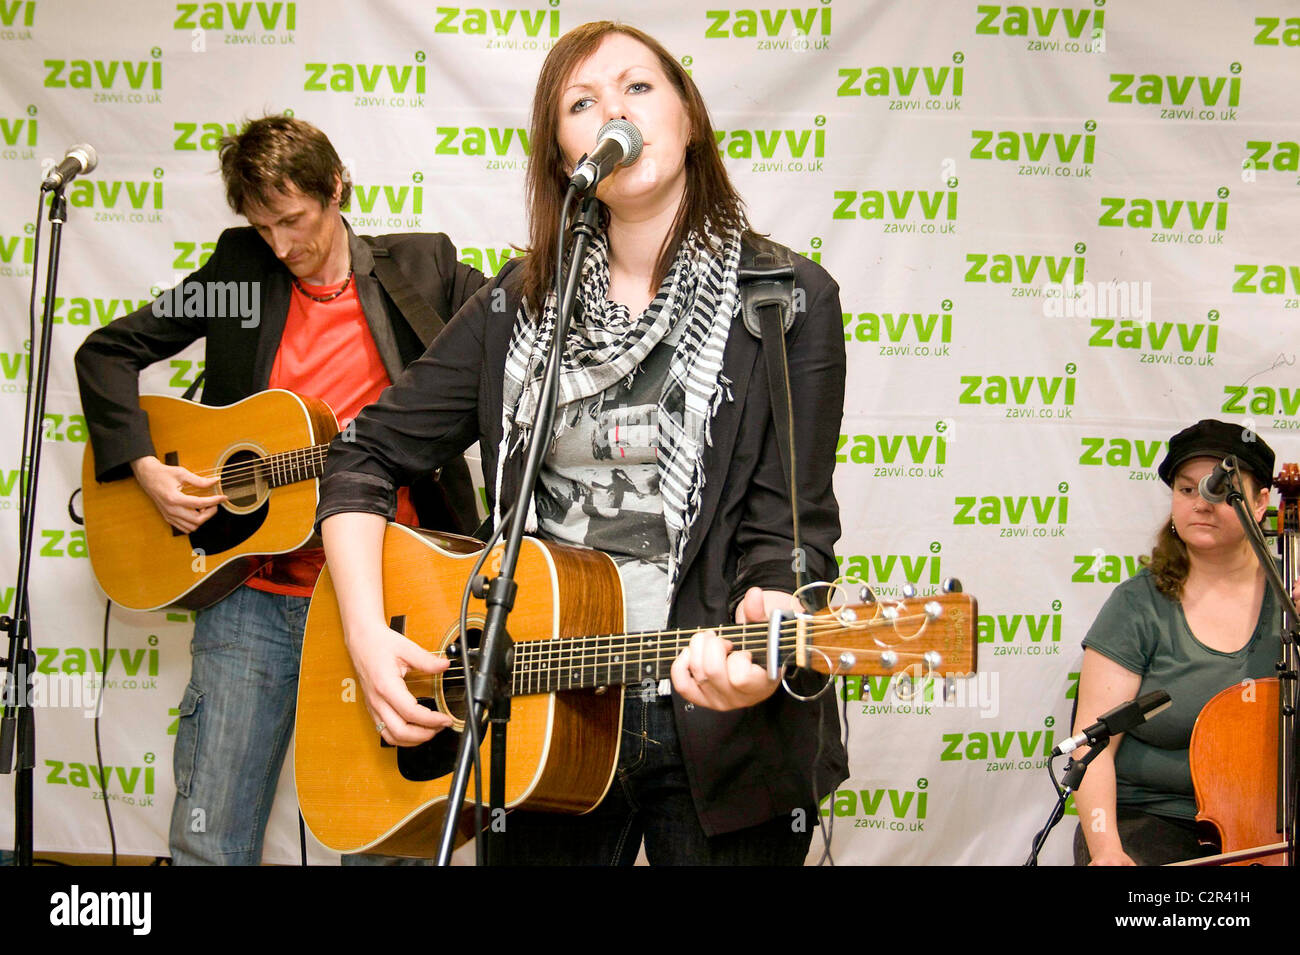 Thea Gilmore performing live and signing copies of her new album 'Liejacker' at the Zavvi megastore at Piccadilly Circus Stock Photo